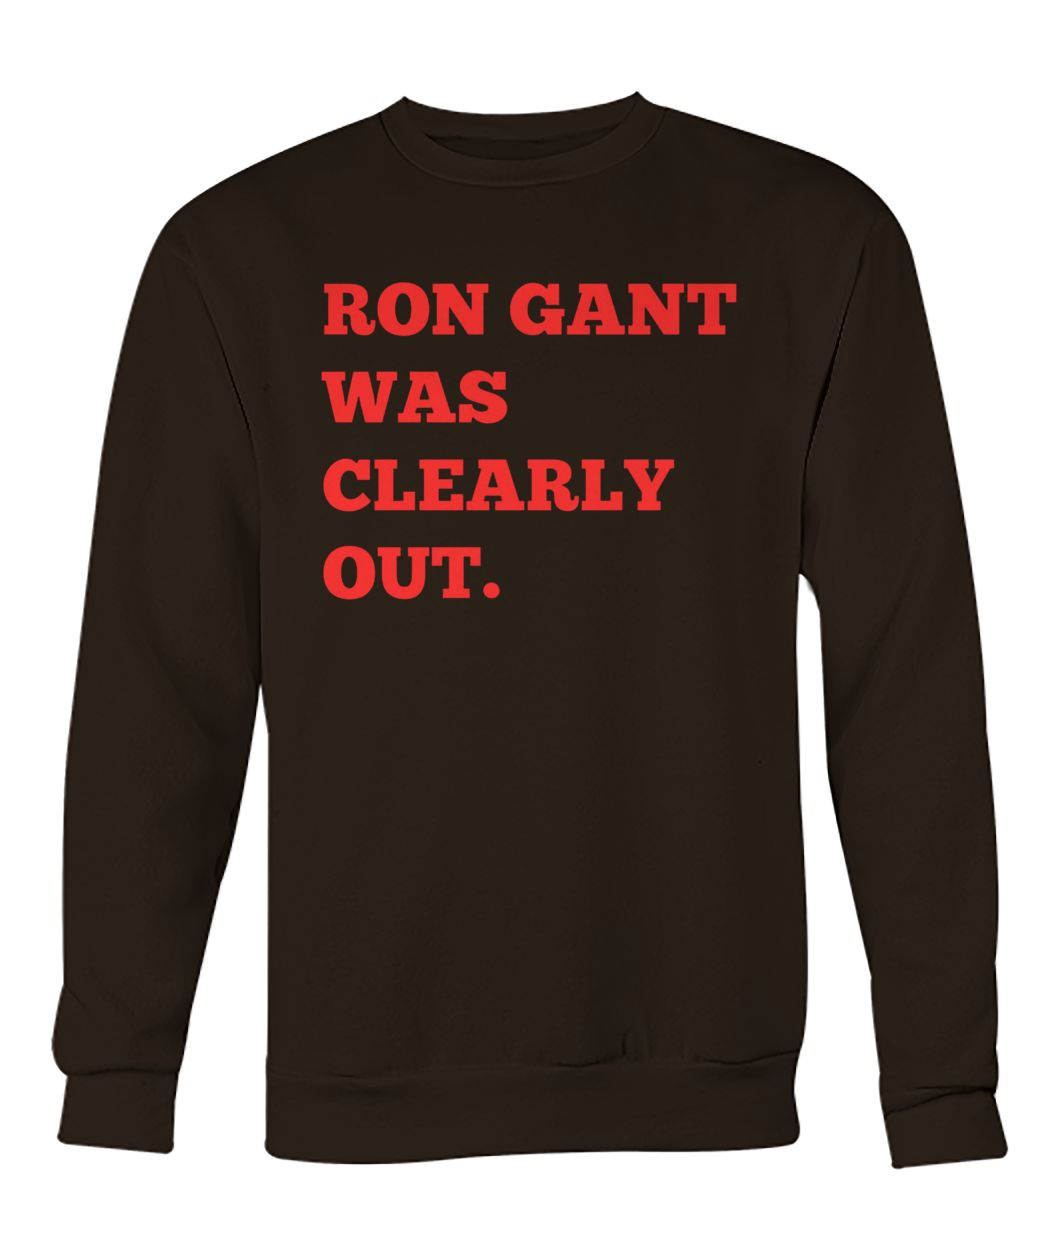 Ron gant was clearly out crew neck sweatshirt